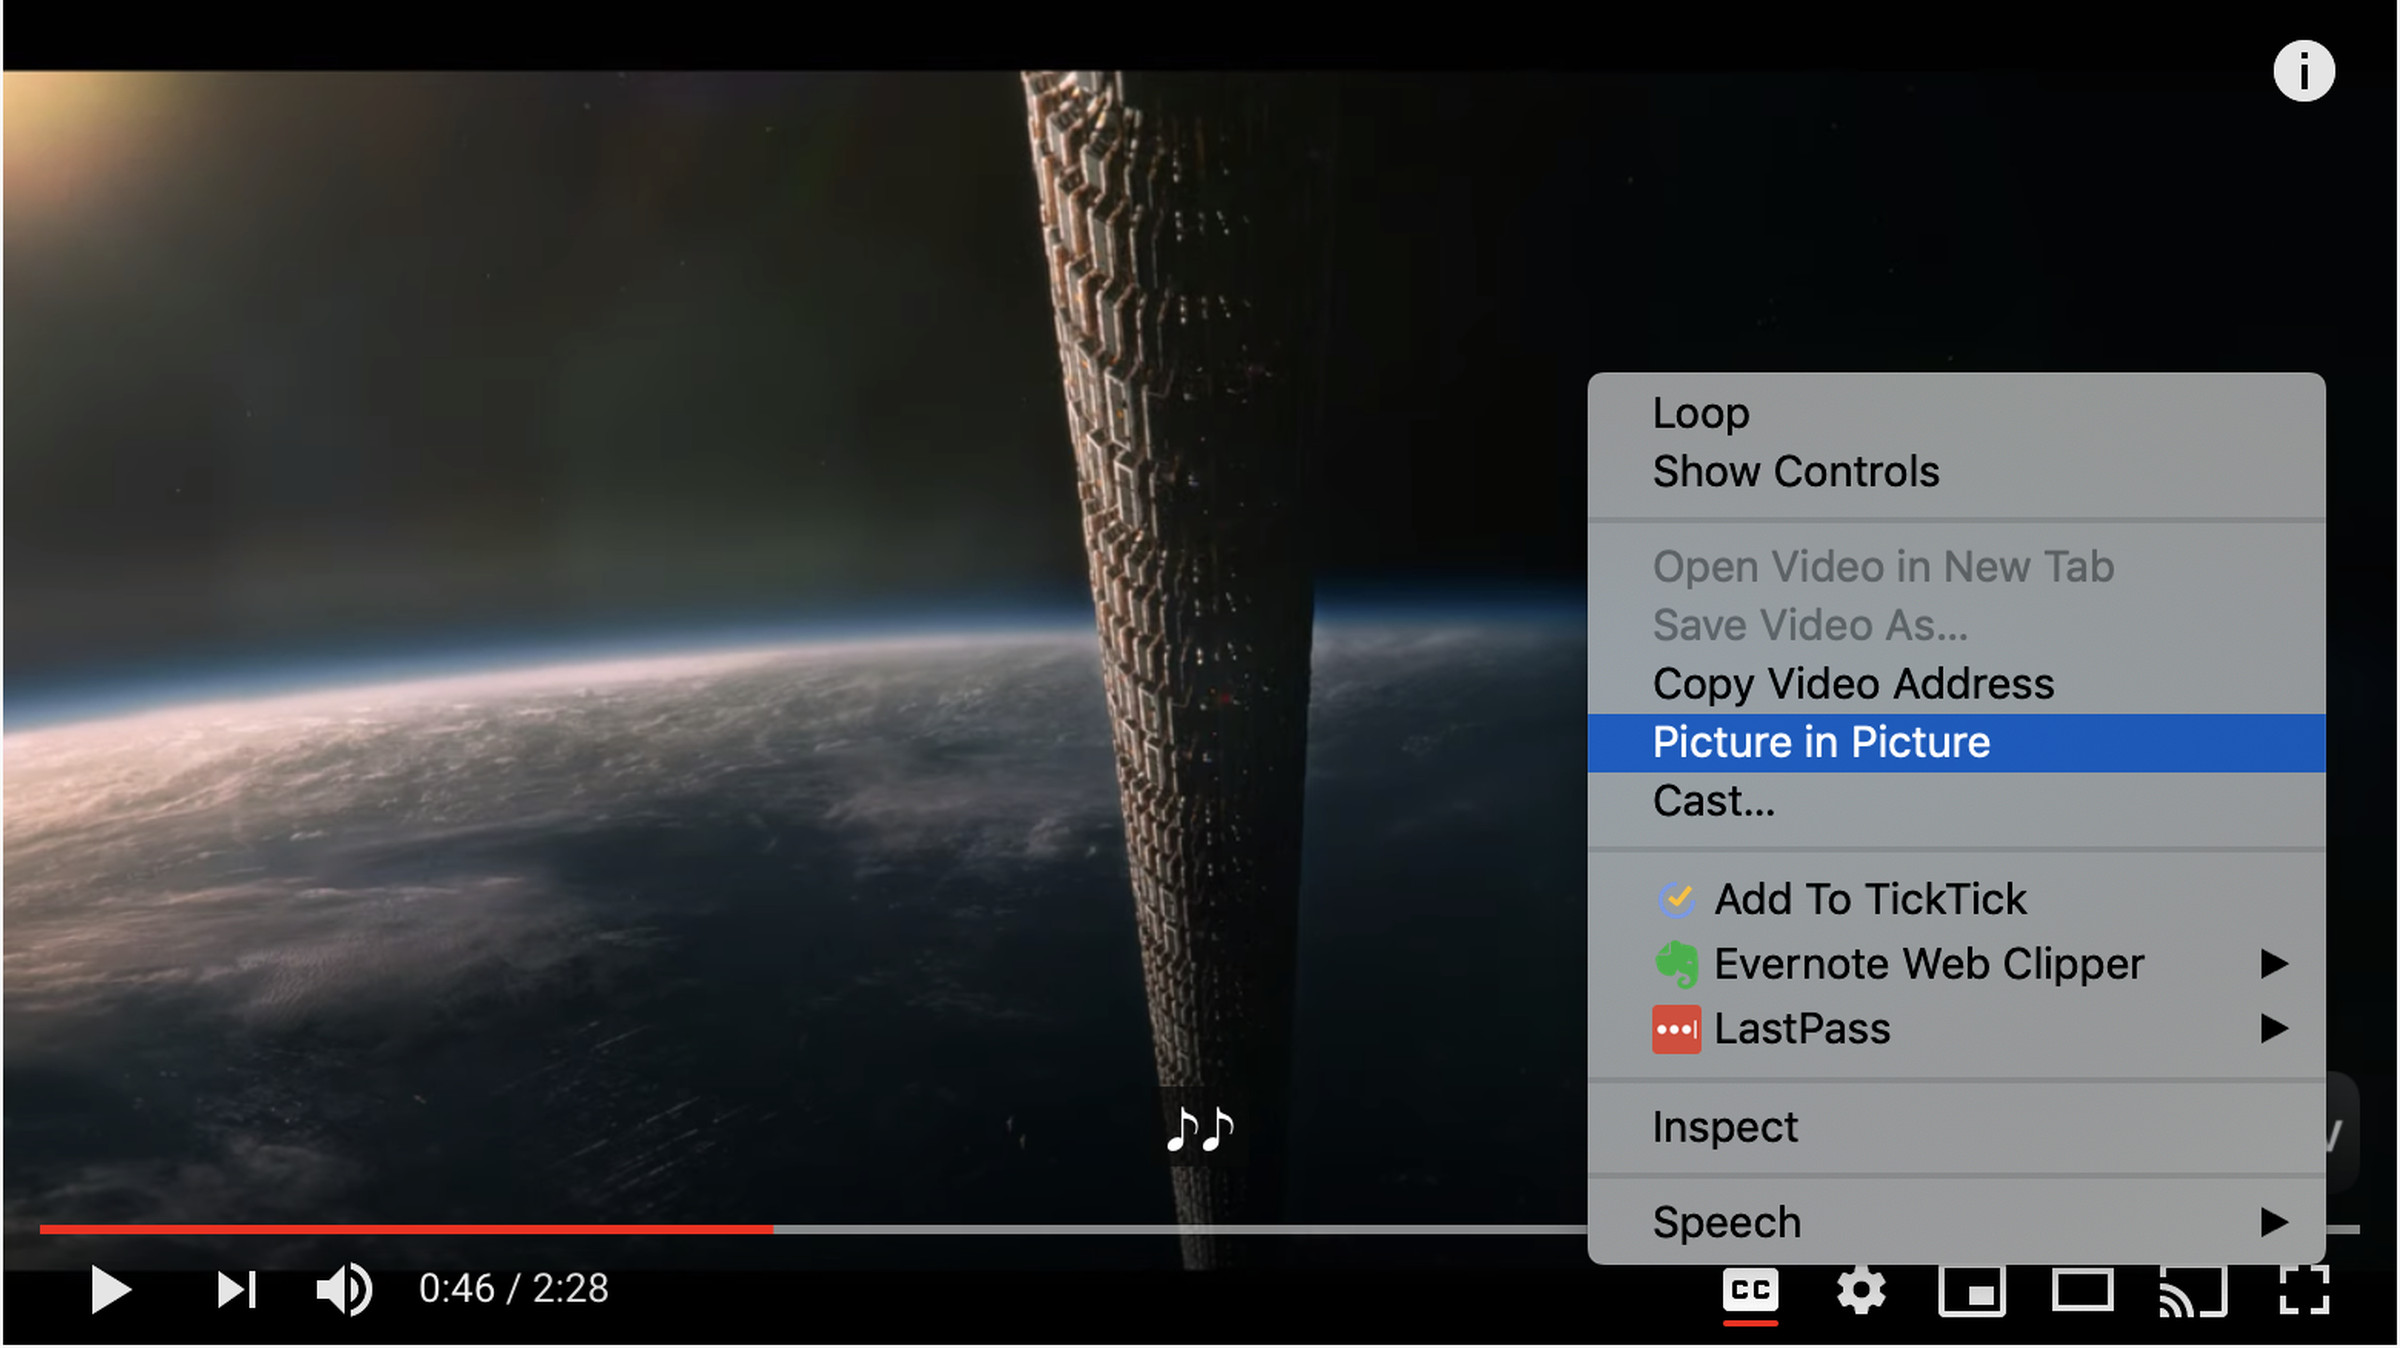 Right-click twice in the YouTube video to get the Picture in Picture menu selection.